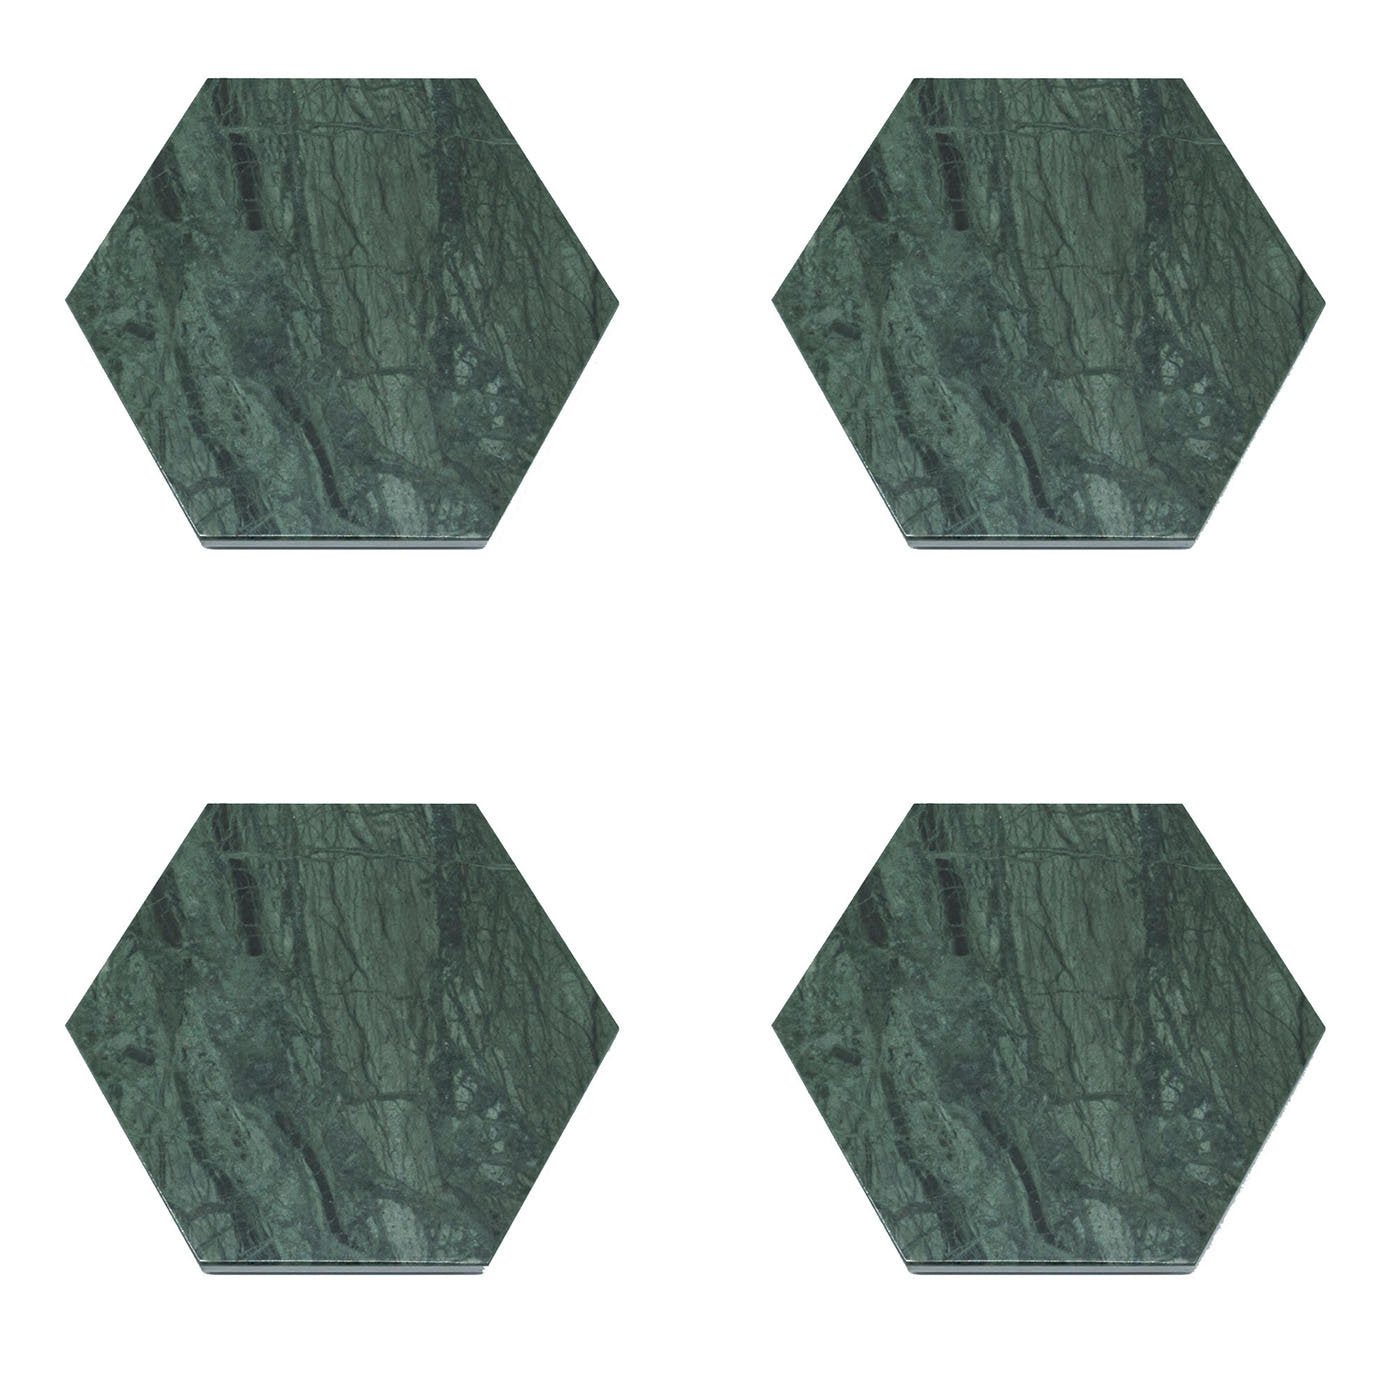 Set of 4 Hexagonal Coasters in Green Marble - Main view